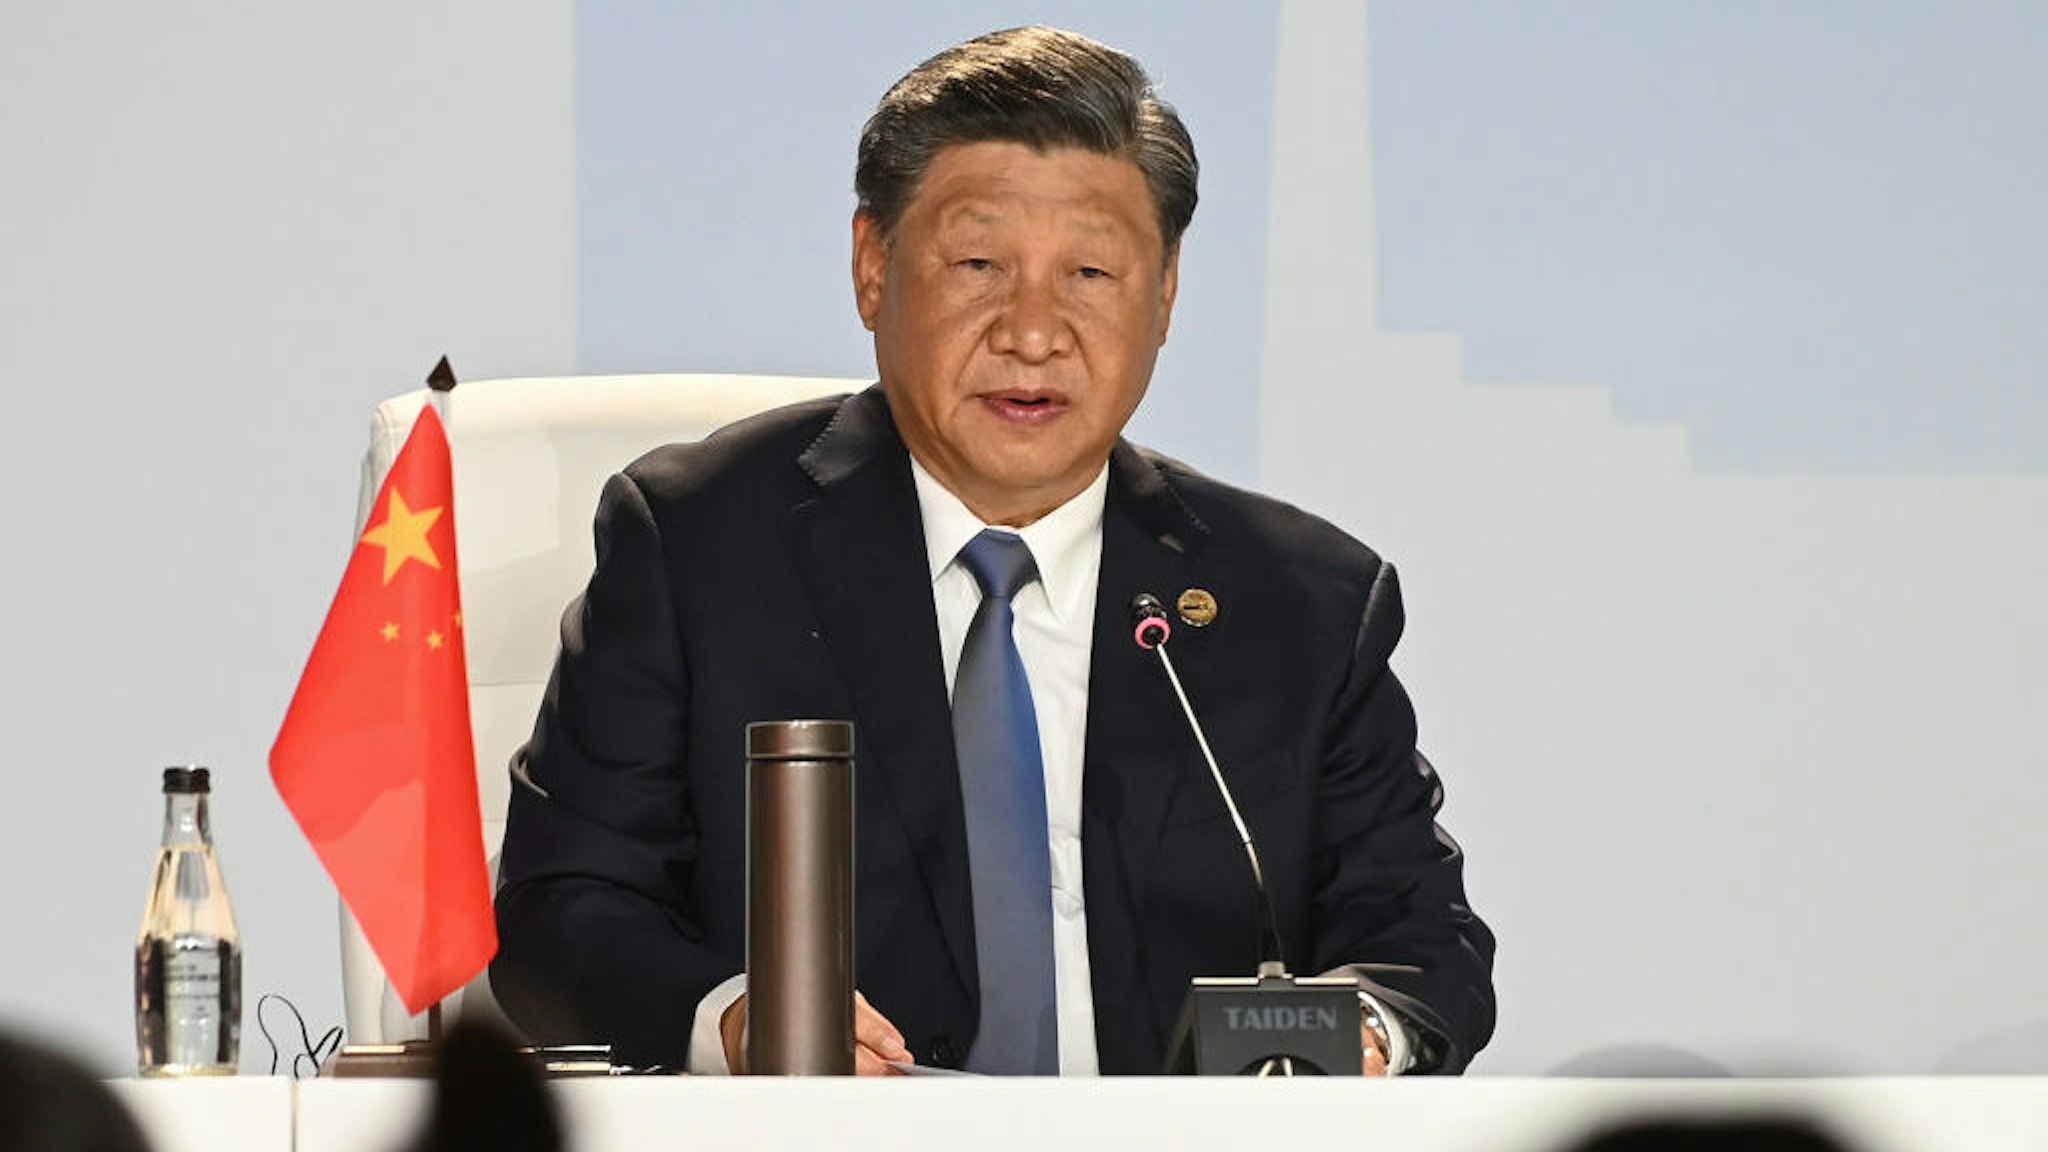 Xi Jinping, China's president, on the closing day of the BRICS summit at the Sandton Convention Center in the Sandton district of Johannesburg, South Africa, on Thursday, Aug. 24, 2023. Expansion of BRICS membership is top of the agenda for the summit being hosted this week by South Africa. Photographer: Leon Sadiki/Bloomberg